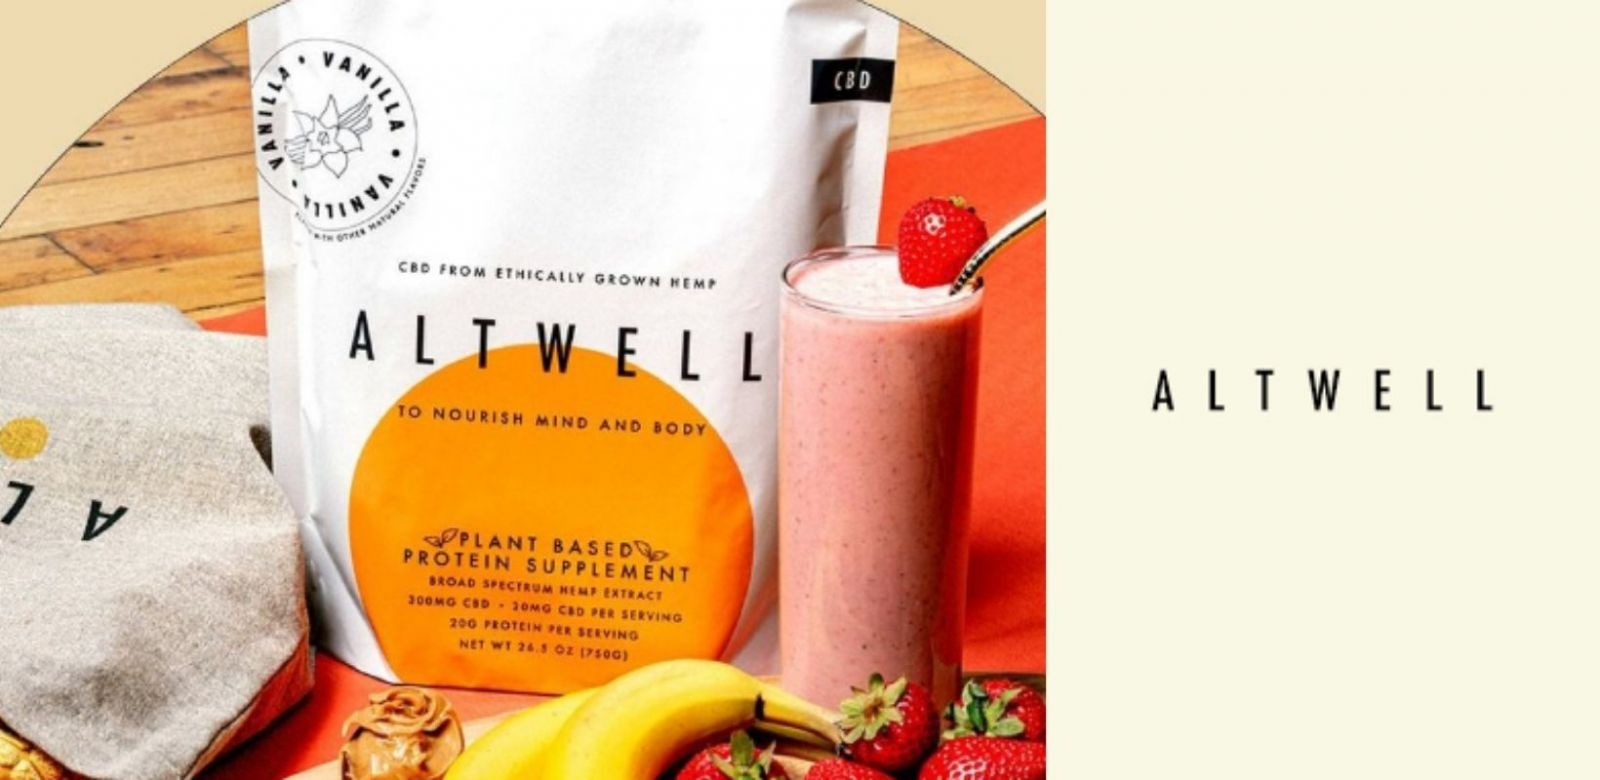 Photo for: ALTWELL: Plant based Protein Supplement